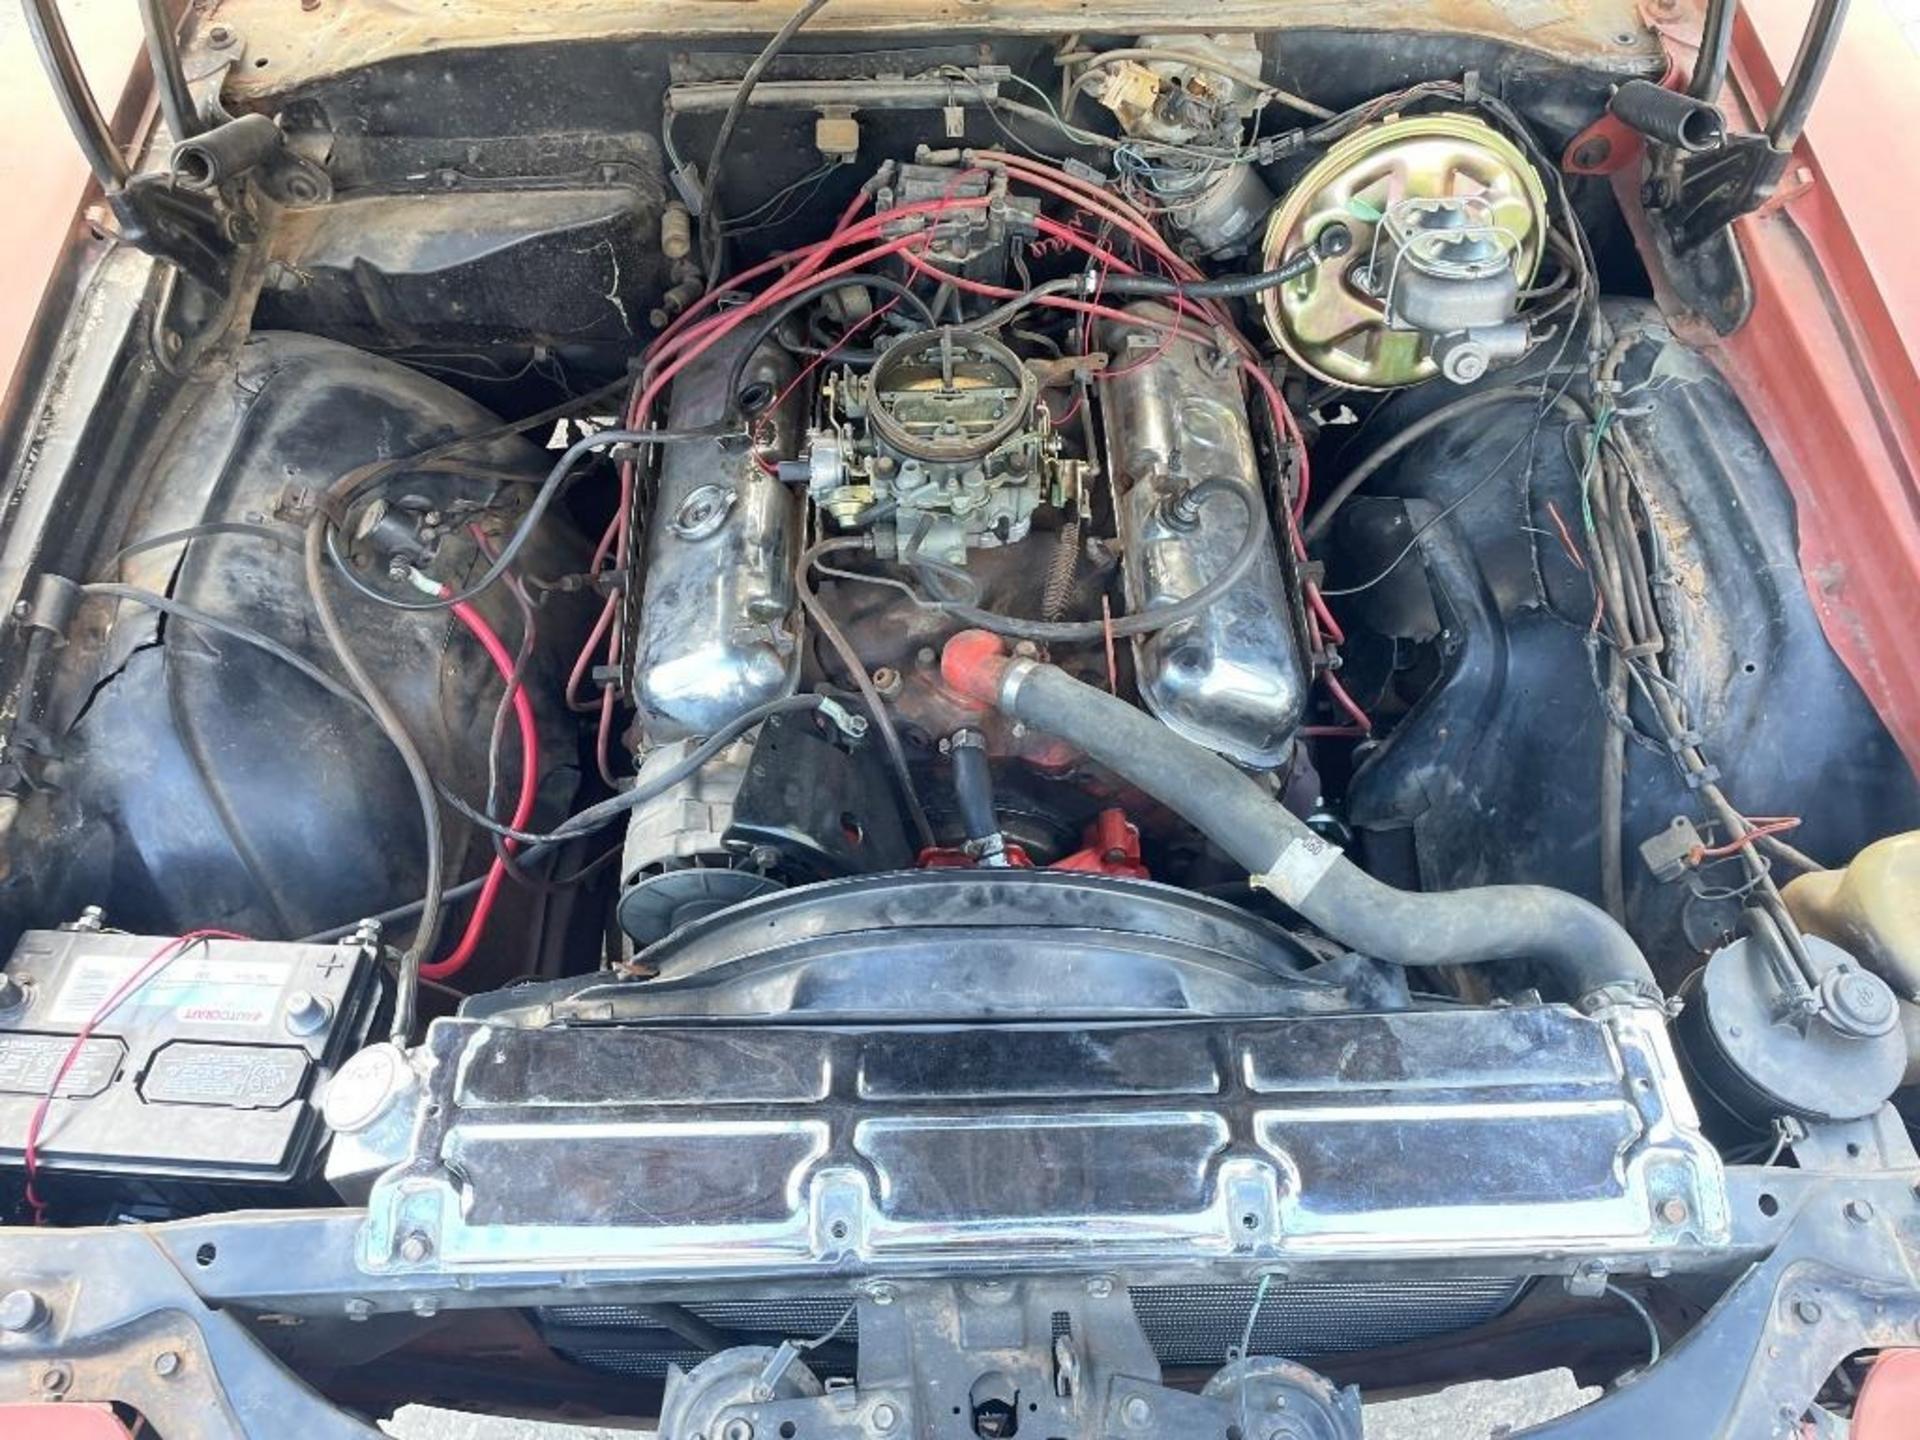 1970 Chevrolet Chevelle SS Project Car with Build Shee photo